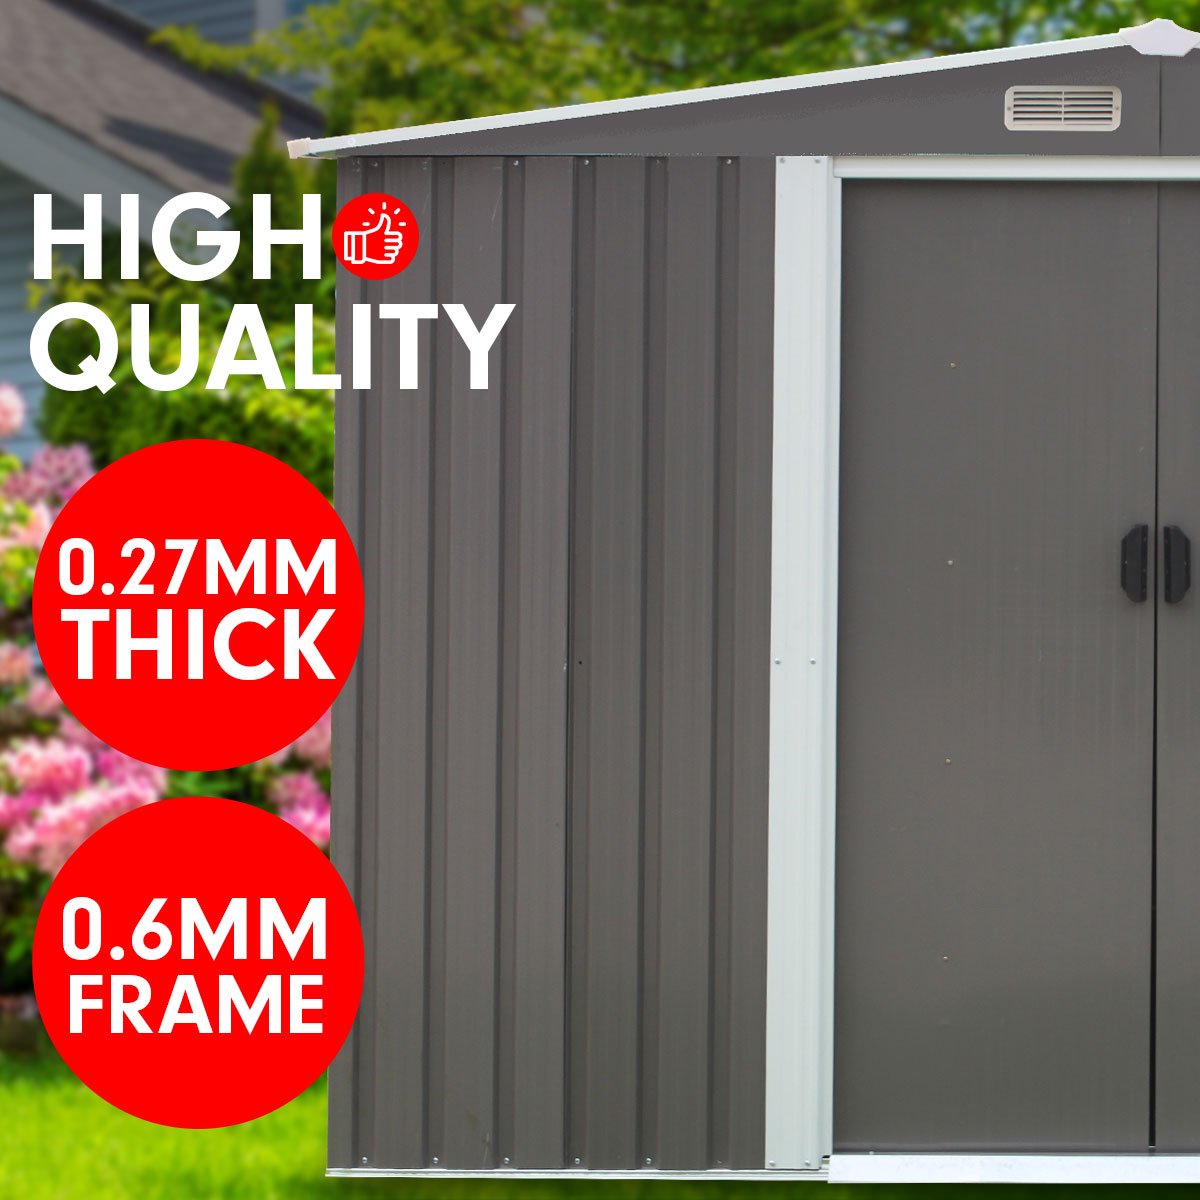 Shed Wallaroo Garden Shed Gable Roof 6ft x 8ft Outdoor Storage - Grey